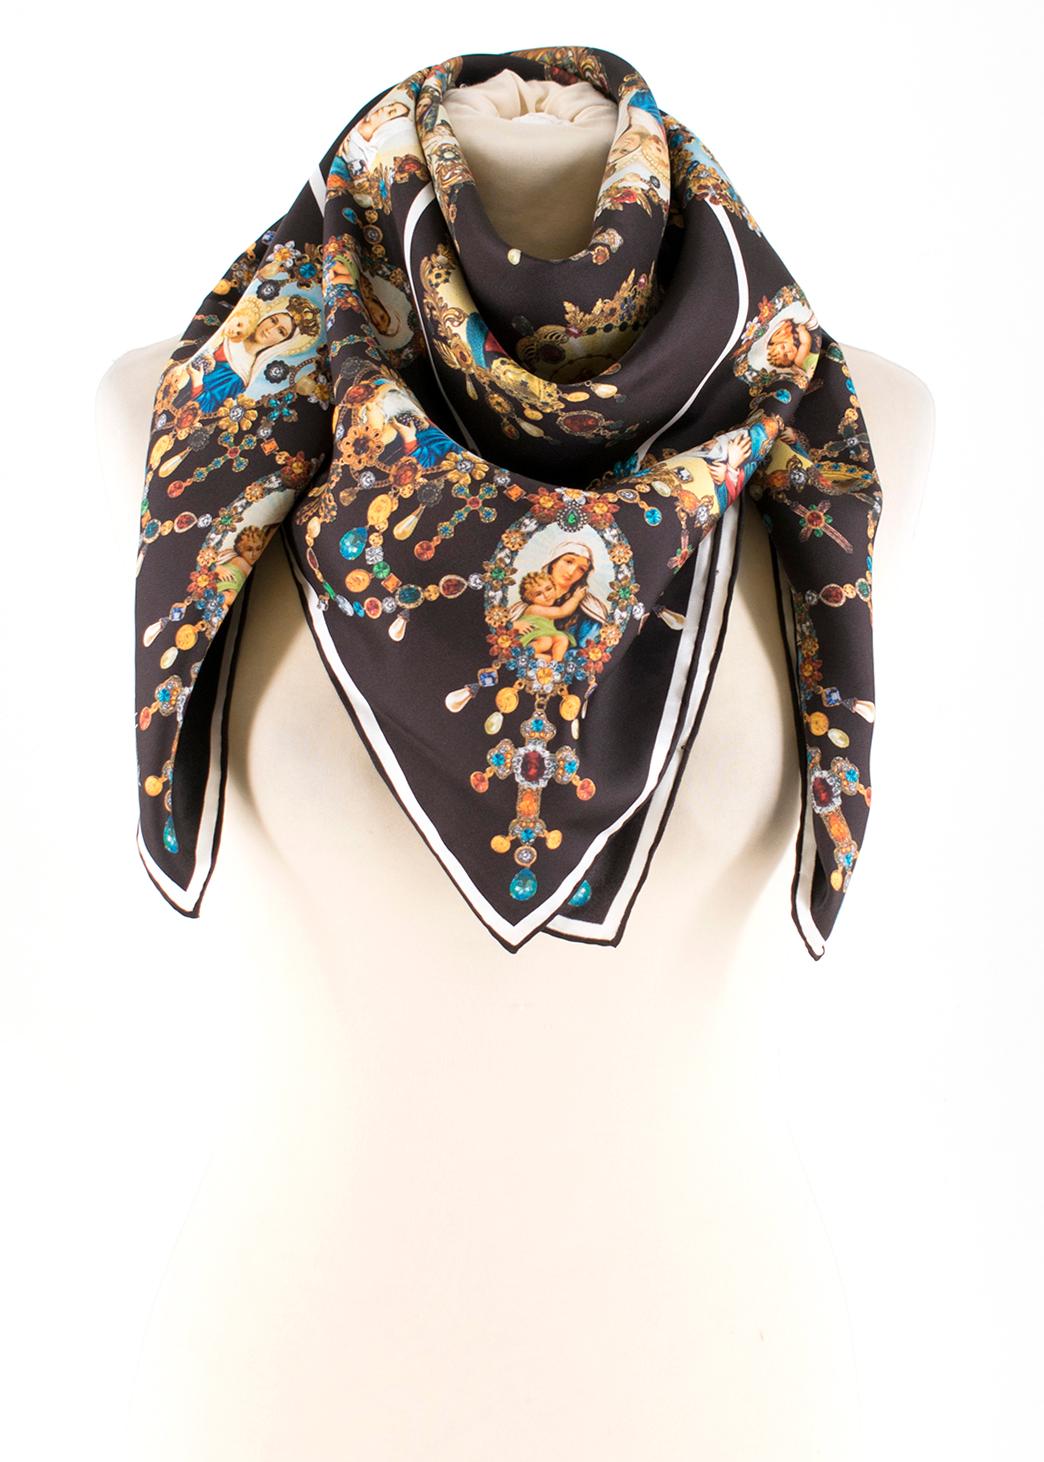 Dolce & Gabbana Madonna Print Silk Scarf

- Multi-coloured silk scarf
- Madonna print
- Stitched rolled edges
- Side logo print

Please note, these items are pre-owned and may show some signs of storage, even when unworn and unused. This is